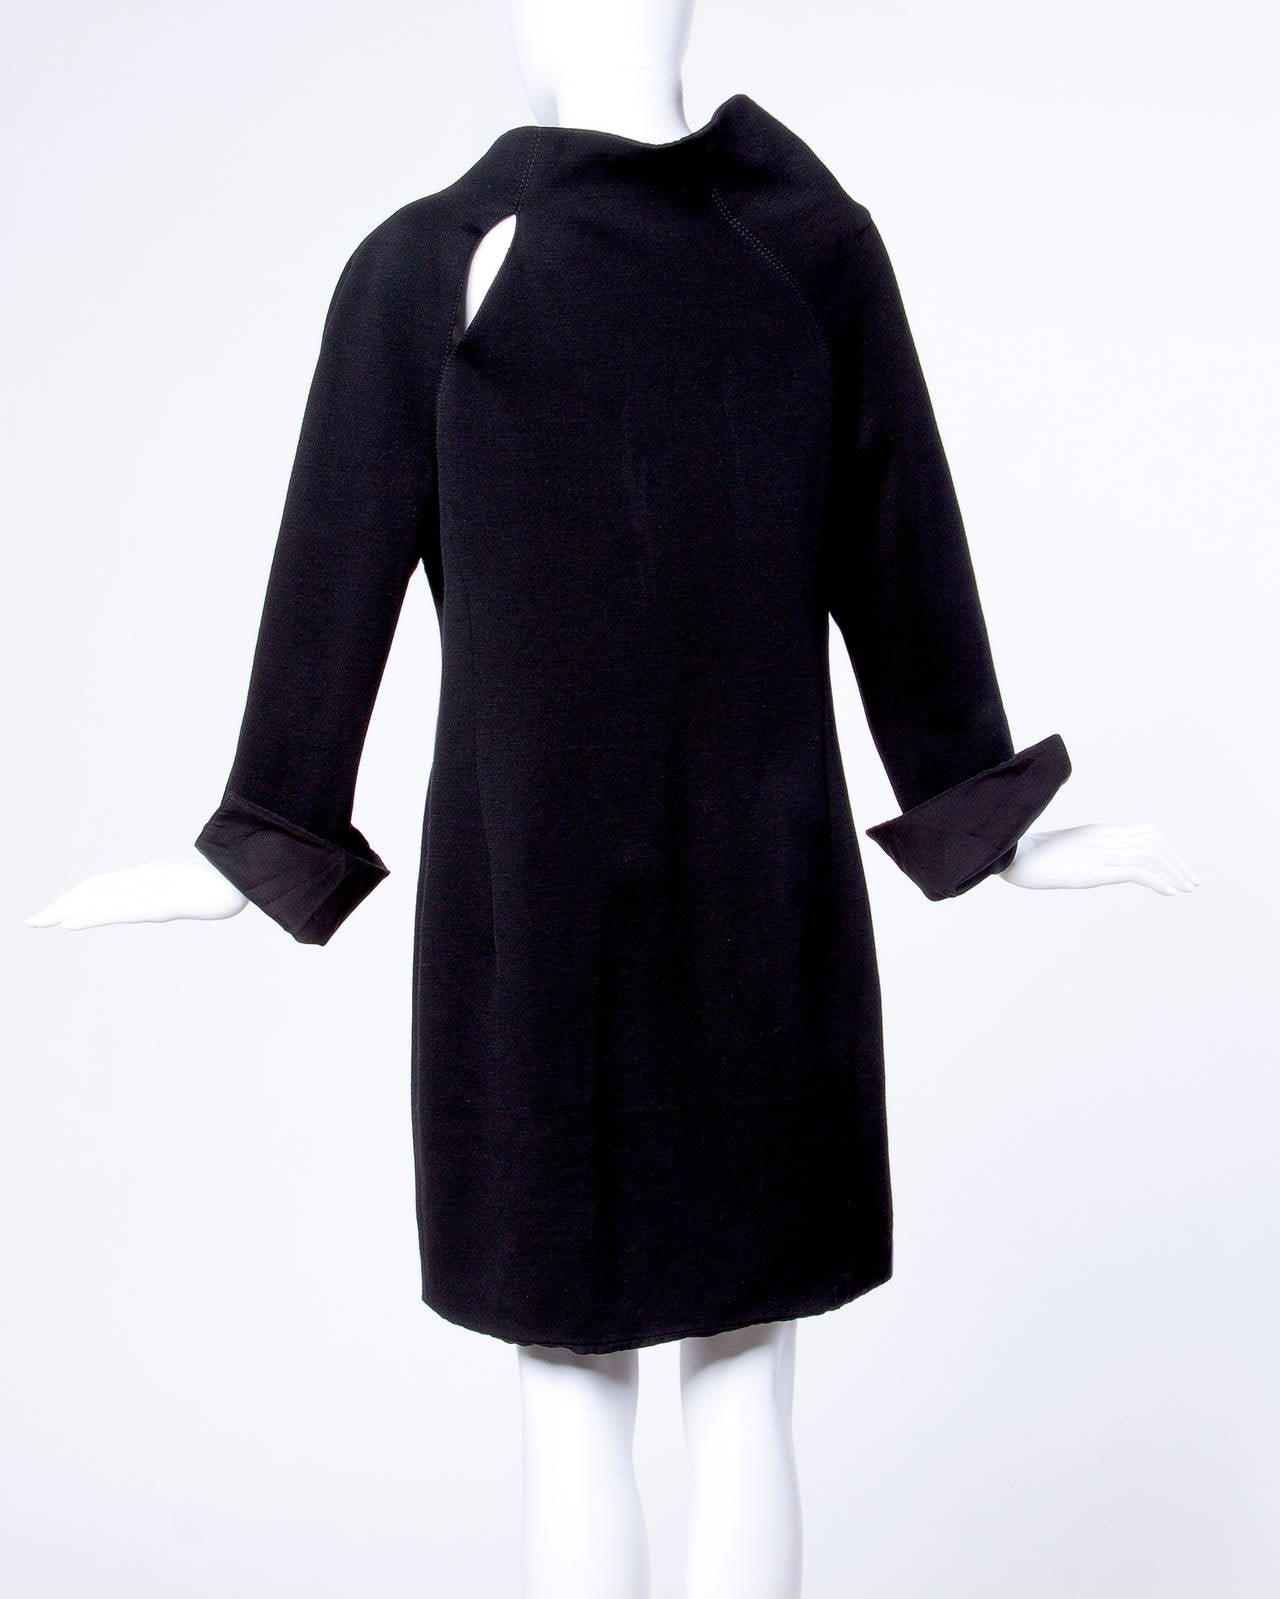 Gianfranco Ferre Vintage Black Wool Silk Avant Garde Cut Out Tunic Dress In Excellent Condition For Sale In Sparks, NV